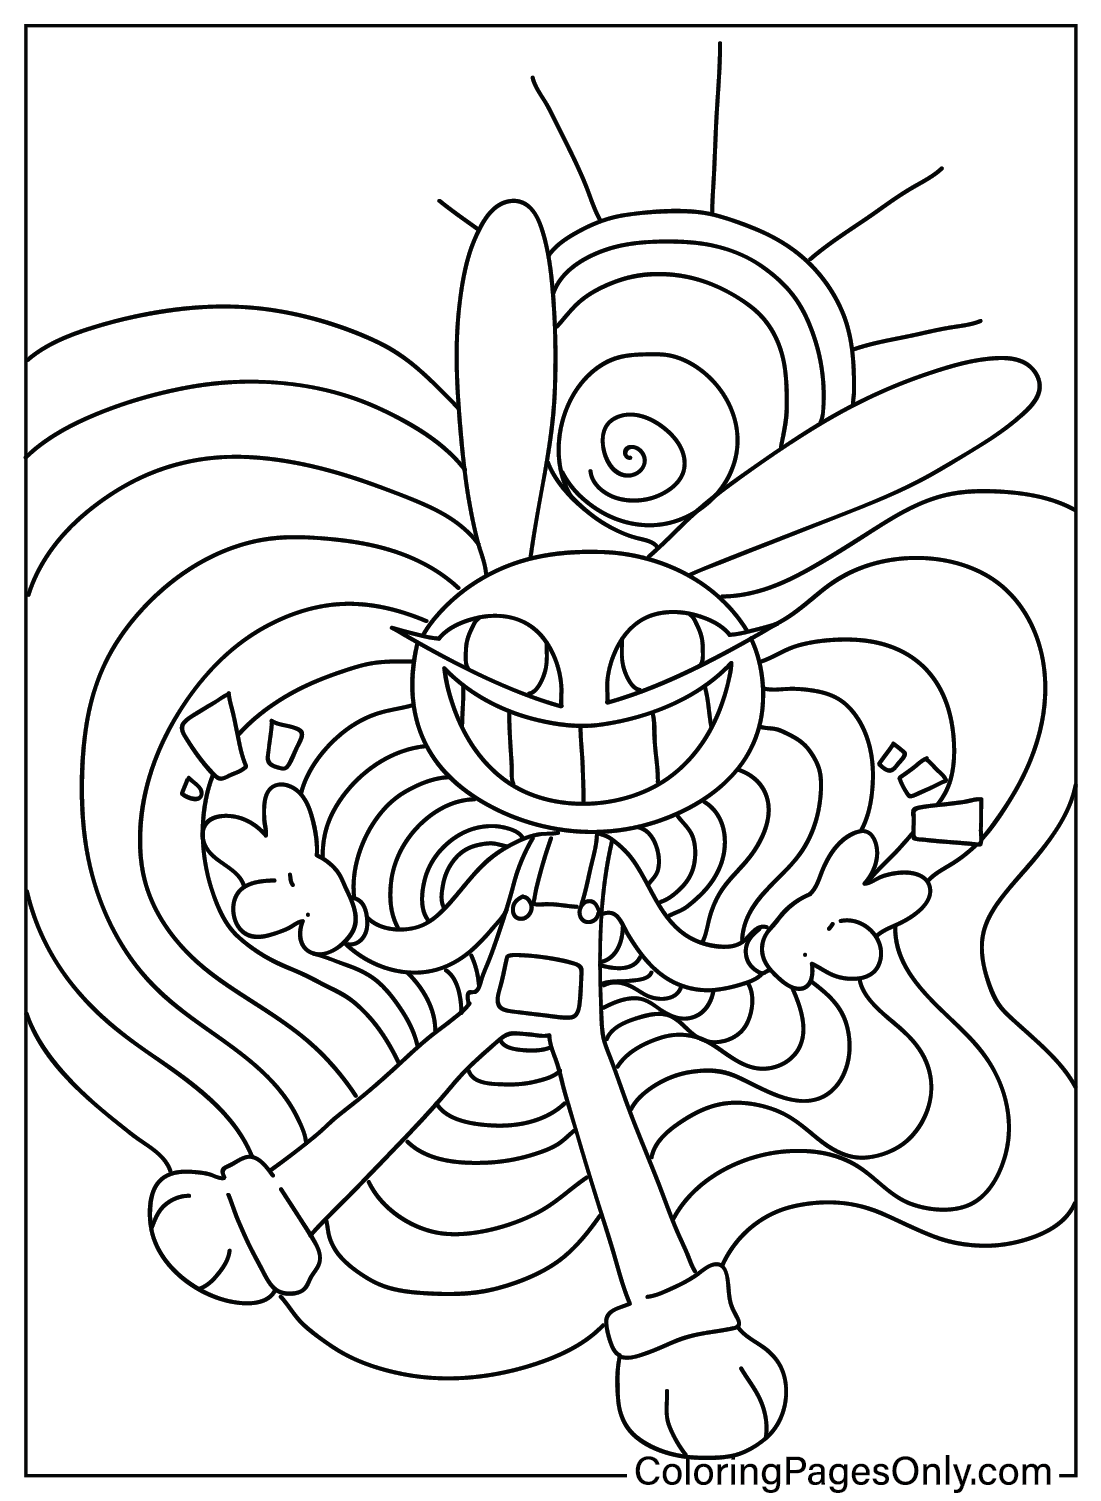 Images Jax Coloring Page from Jax